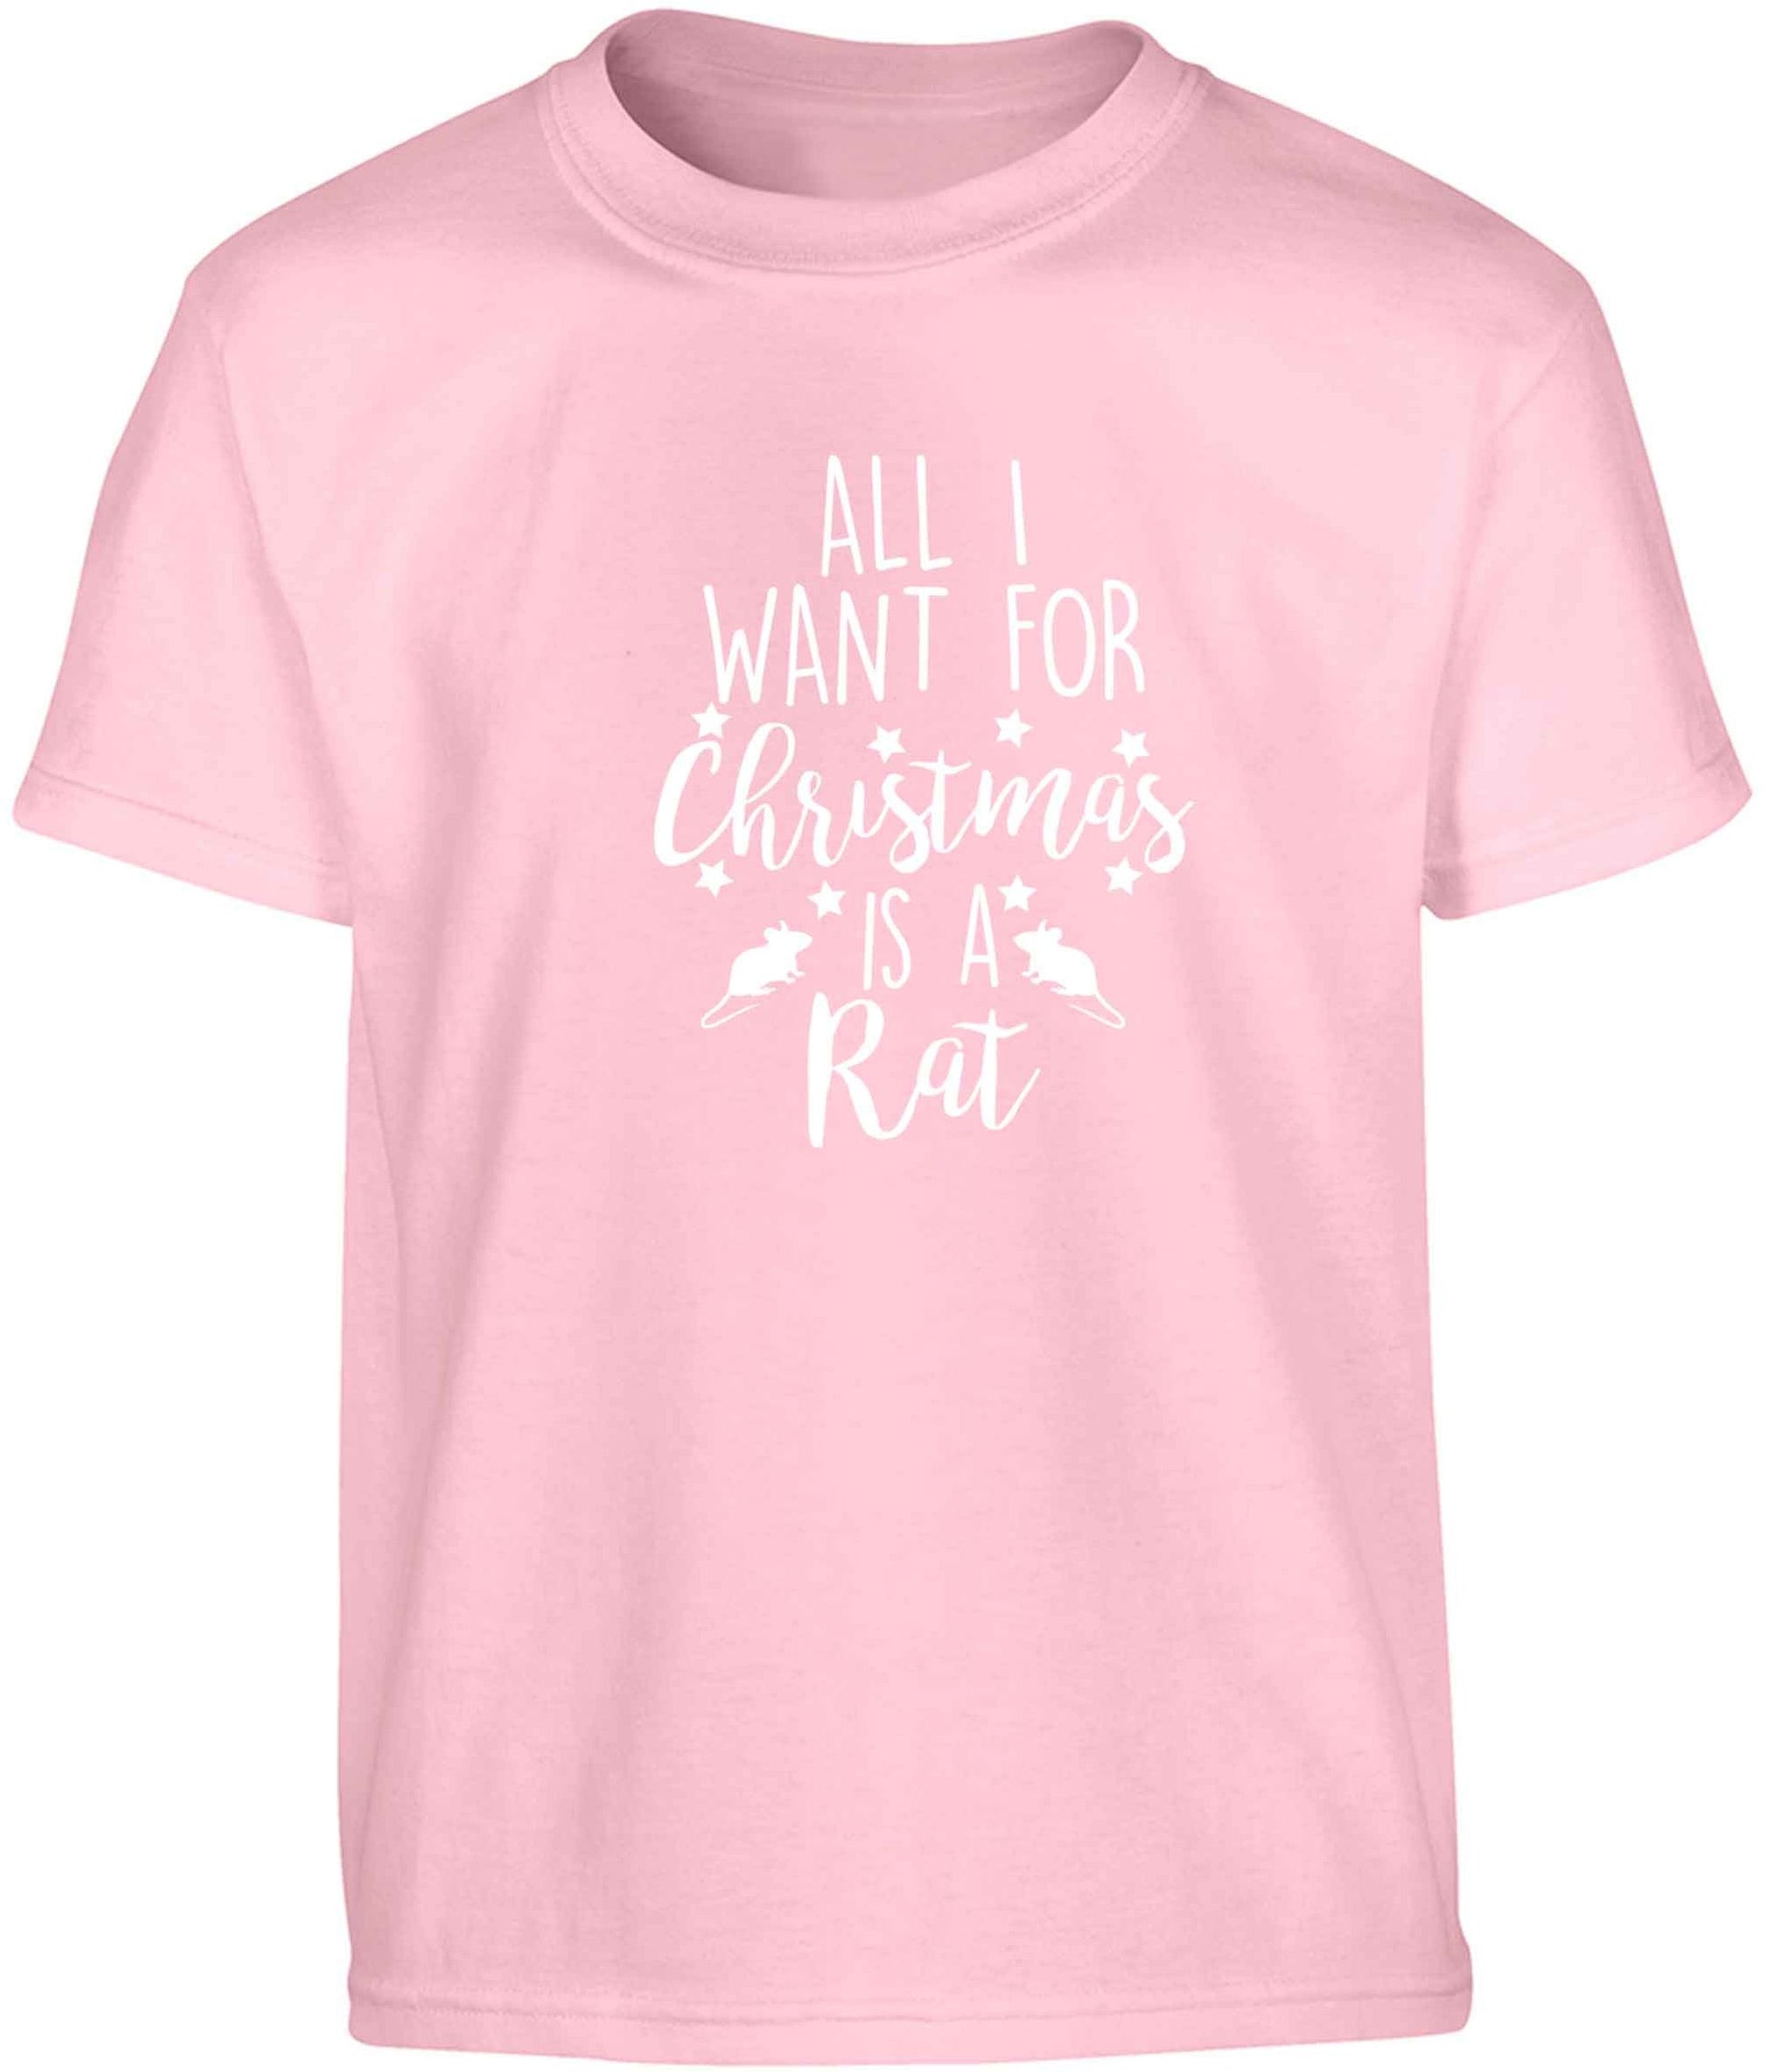 All I want for Christmas is a rat Children's light pink Tshirt 12-13 Years